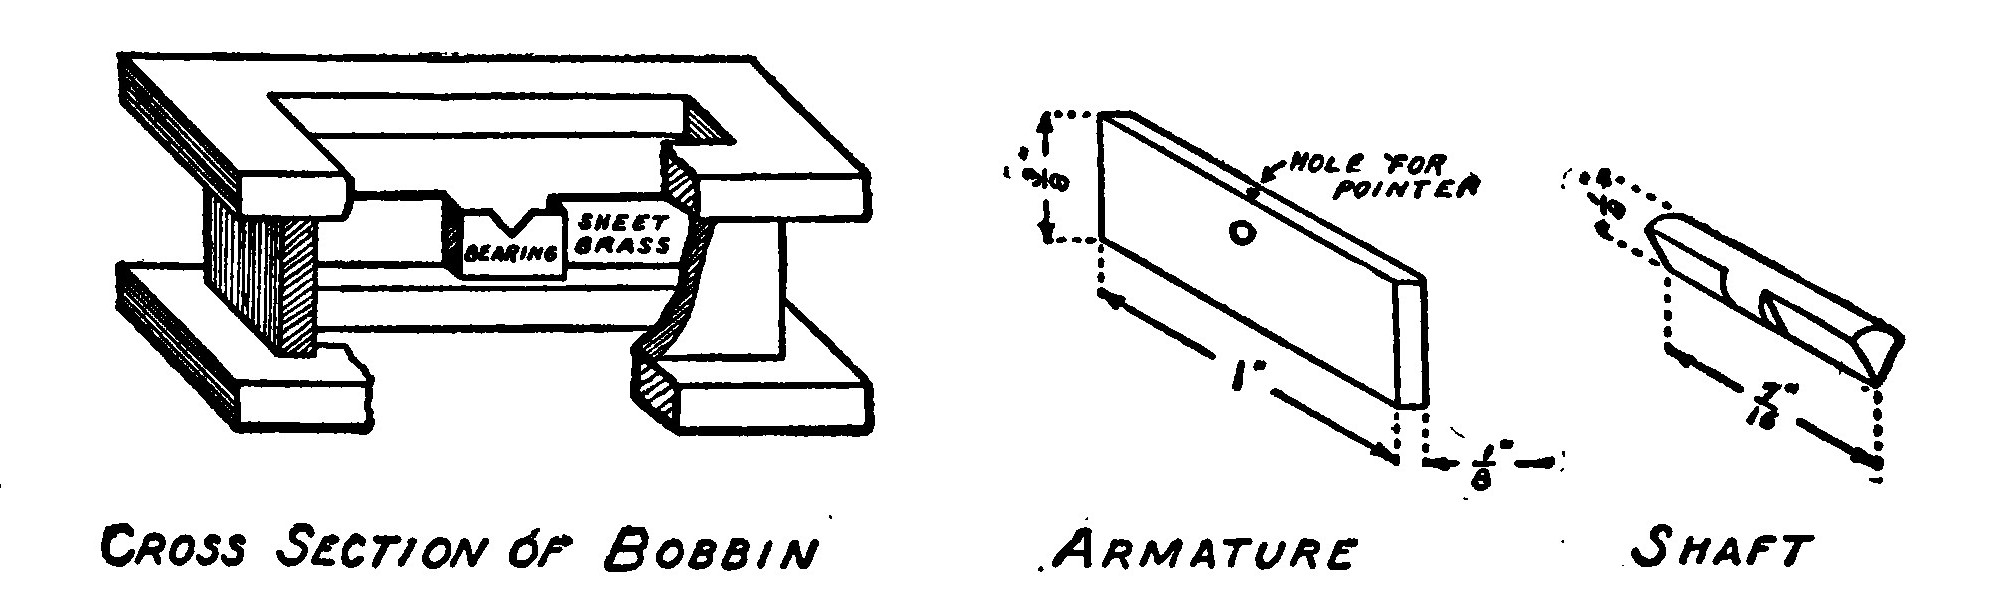 Fig. 107.—The Bobbin partly cut away so as to show the Bearing. Details of the Armature and Shaft.